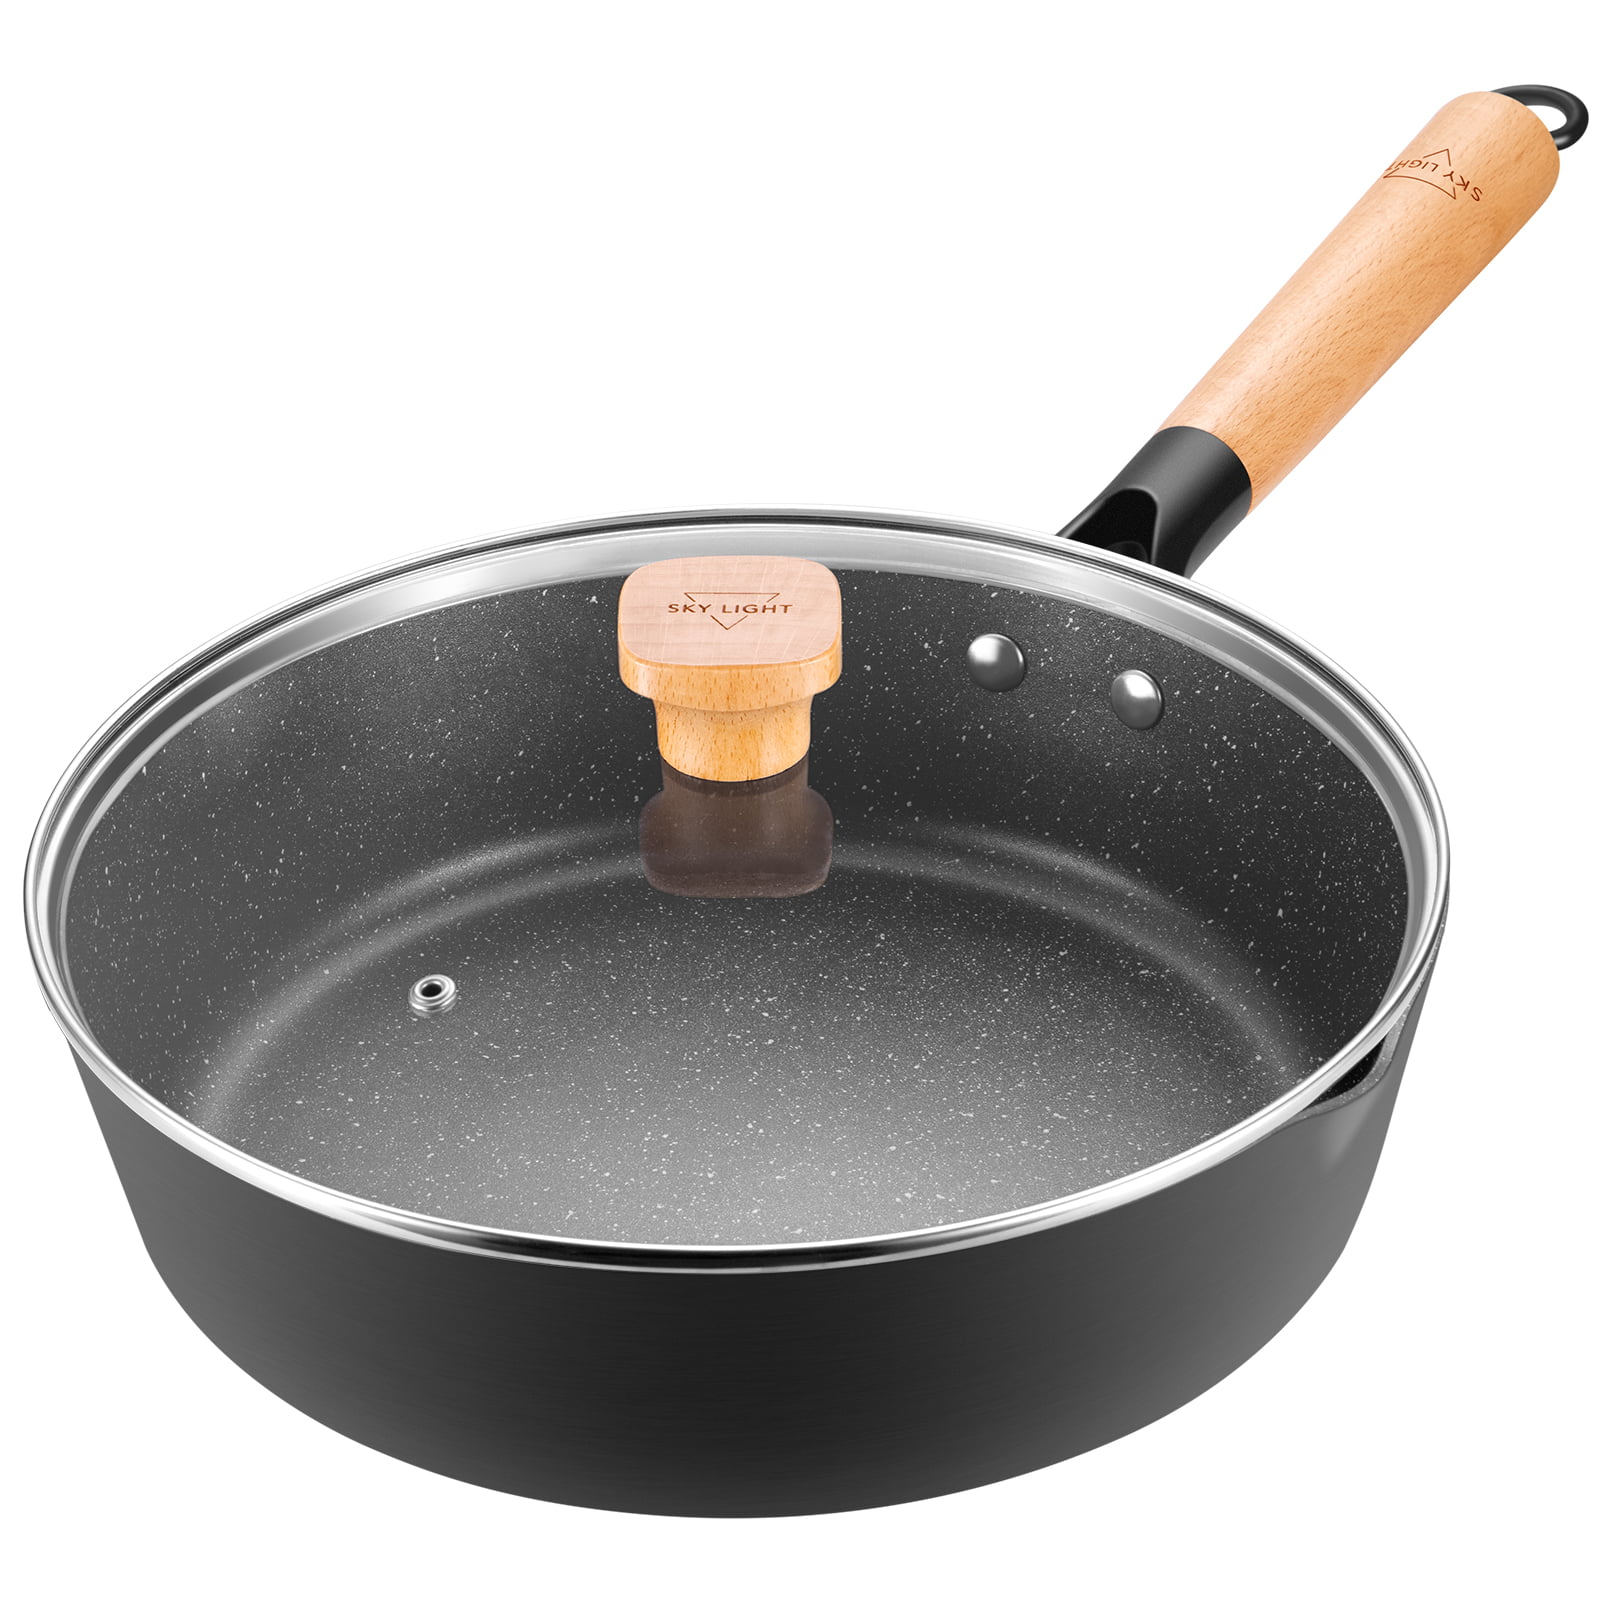 Cooking Pot with Detachable Wooden Handle Wok Pan 30cm Induction Black 100% PFOA-Free Whitford Coating Nonstick Stir Fry Pan with Lid 